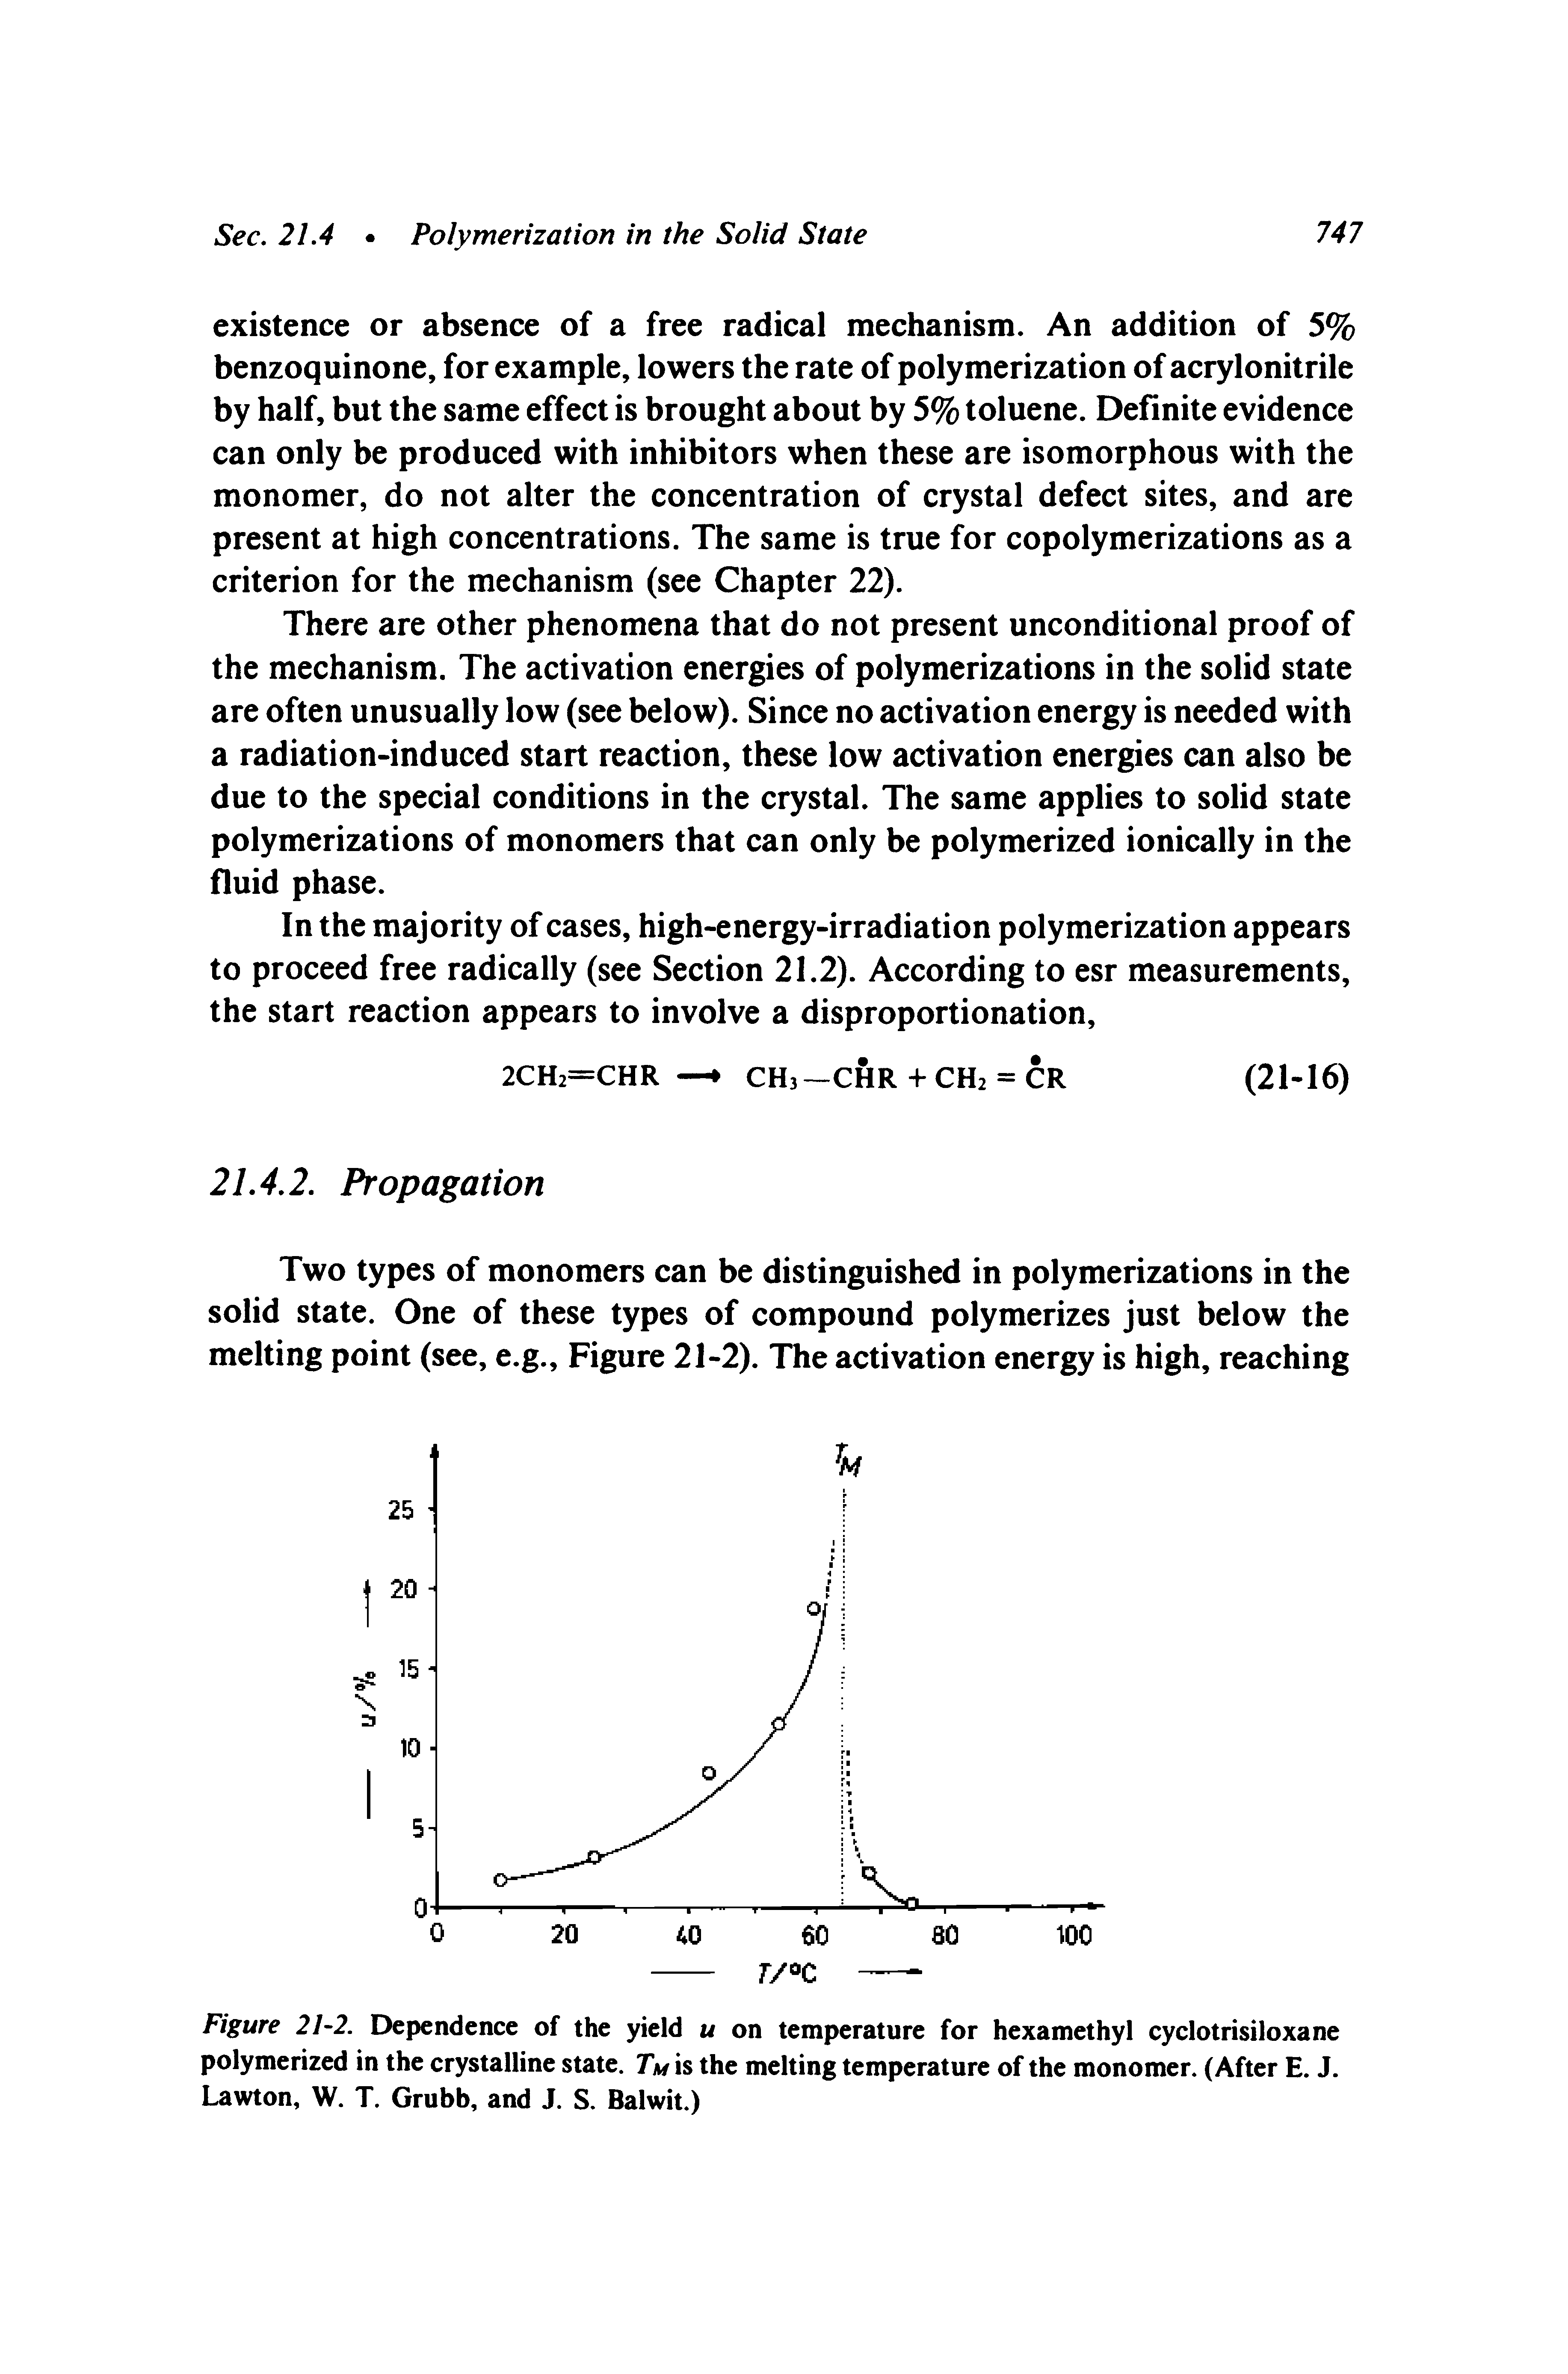 Figure 2/-2. Dependence of the yield u on temperature for hexamethyl cyclotrisiloxane polymerized in the crystalline state. Tm is the melting temperature of the monomer. (After E. J. Lawton, W. T. Grubb, and J. S. Balwit.)...